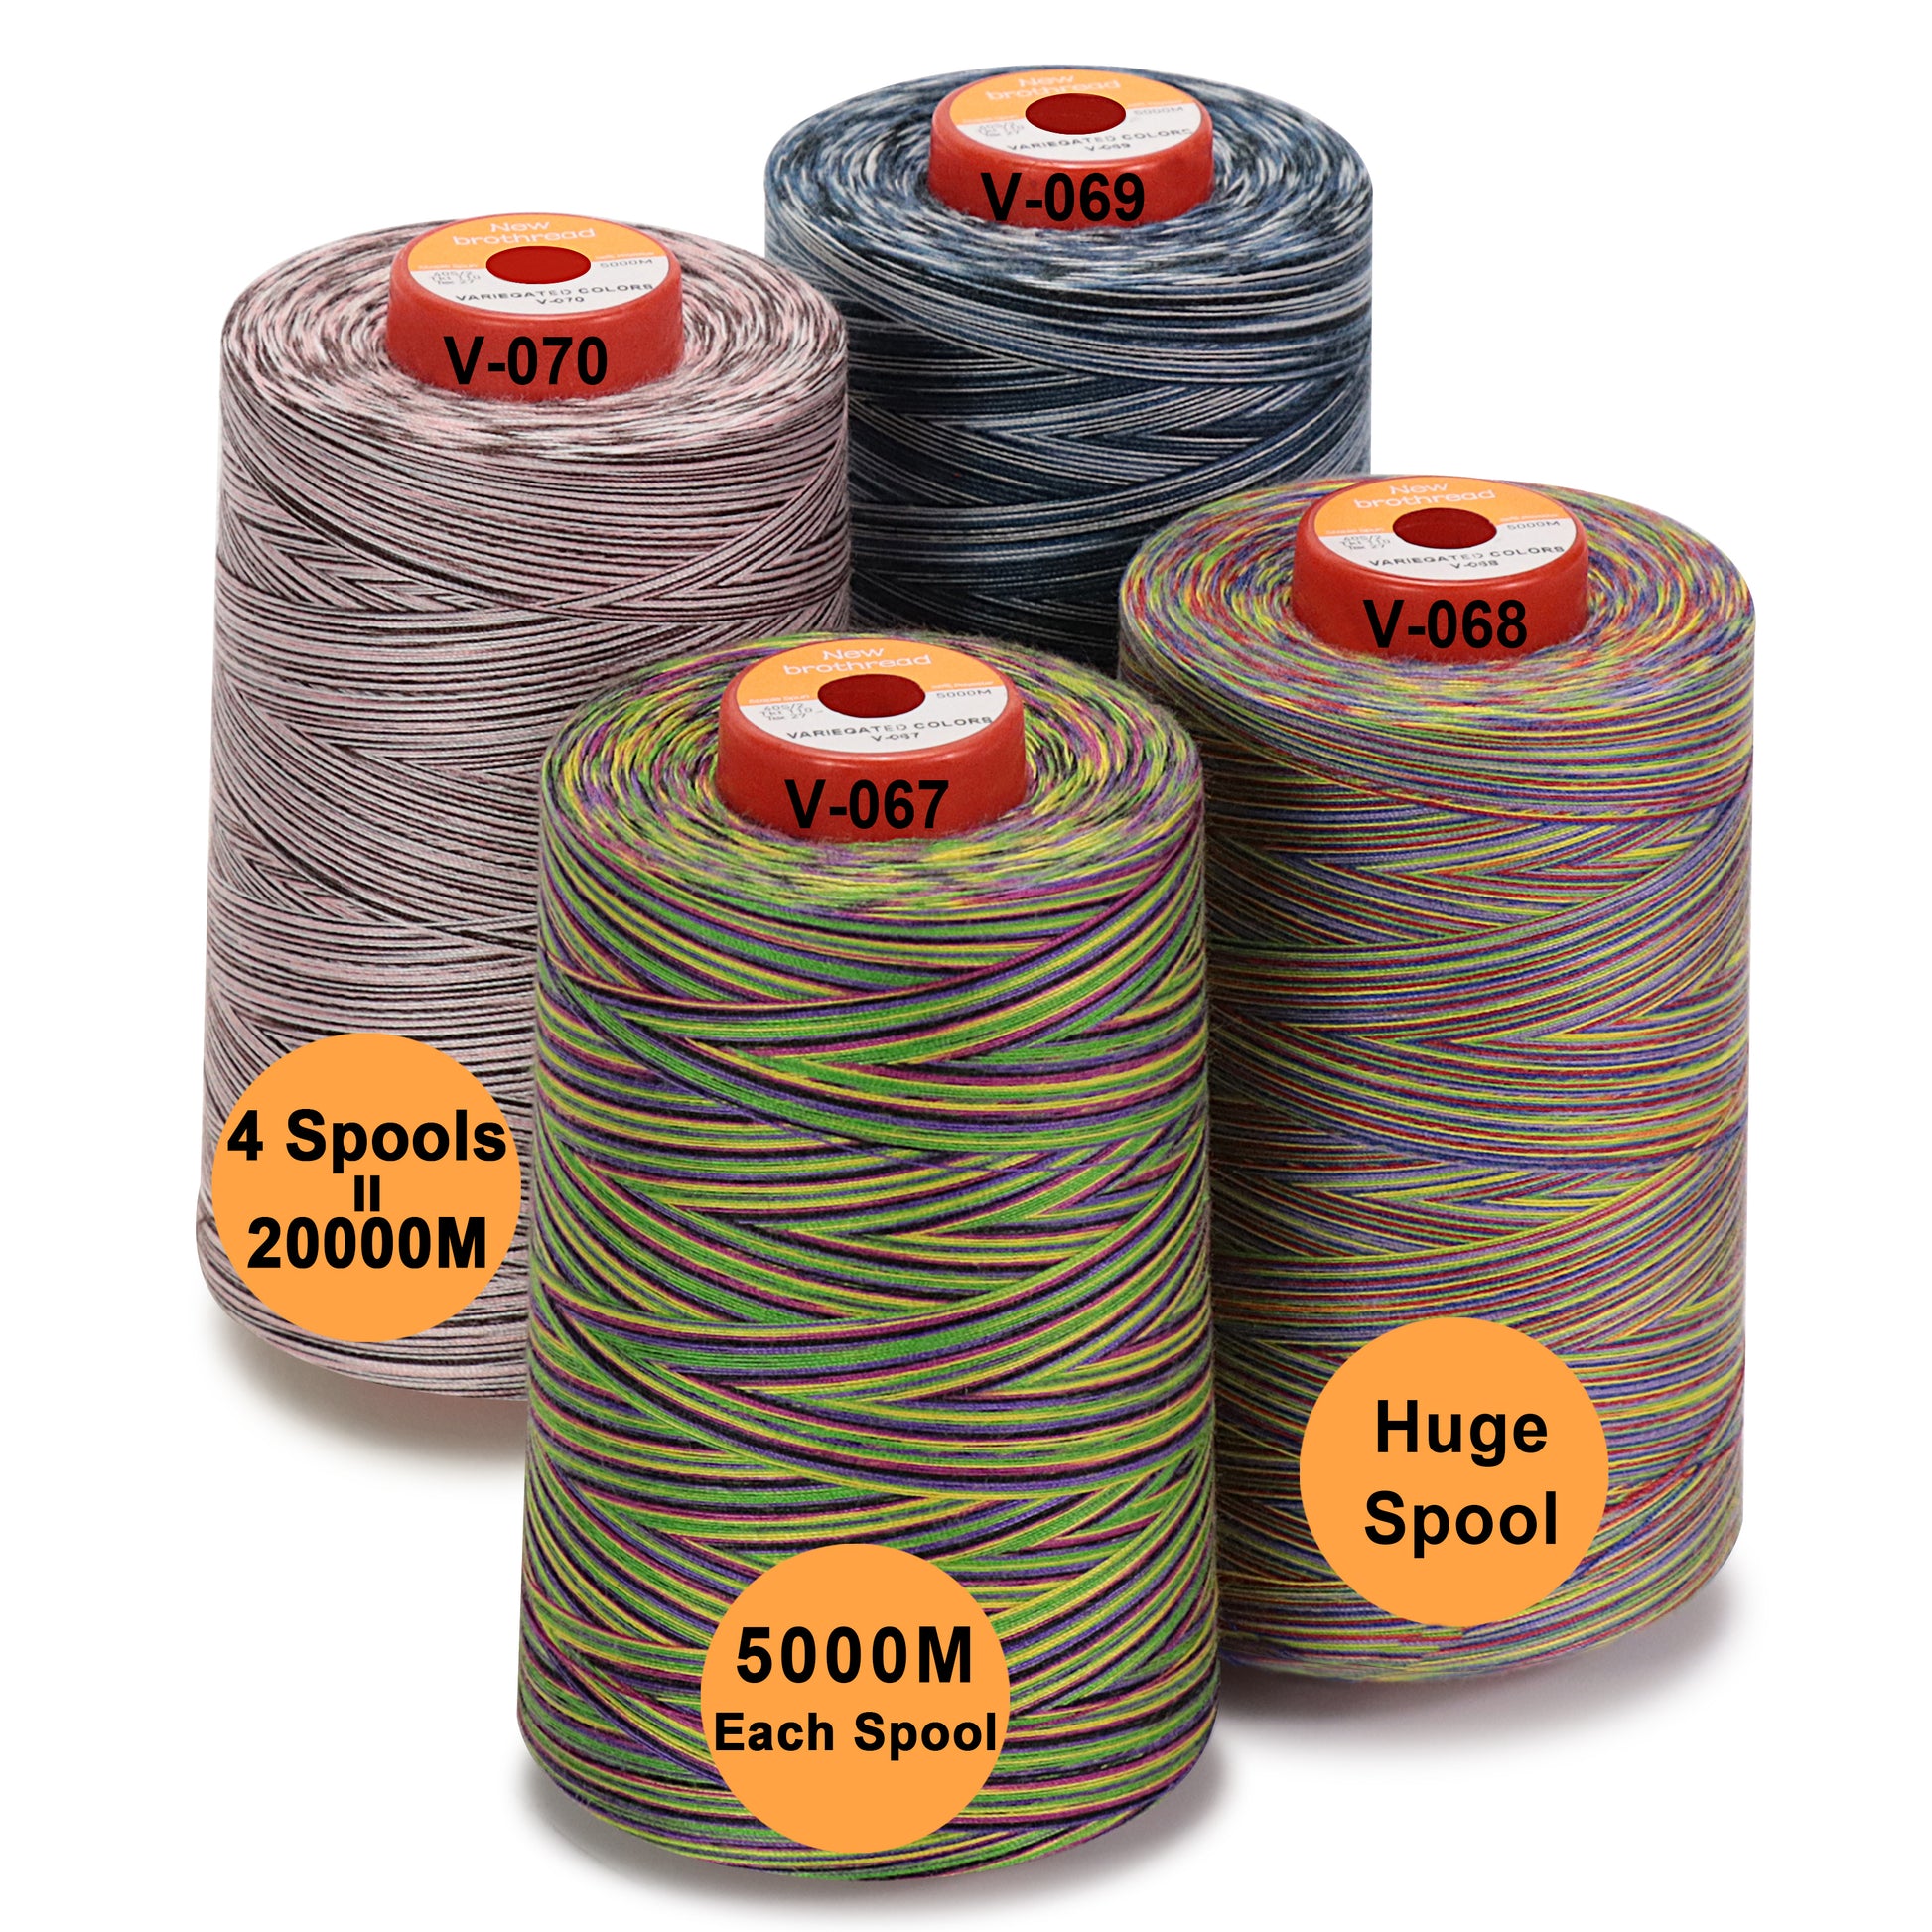 New brothreads - 25 Basic Colors of Huge Spool 5000M Polyester